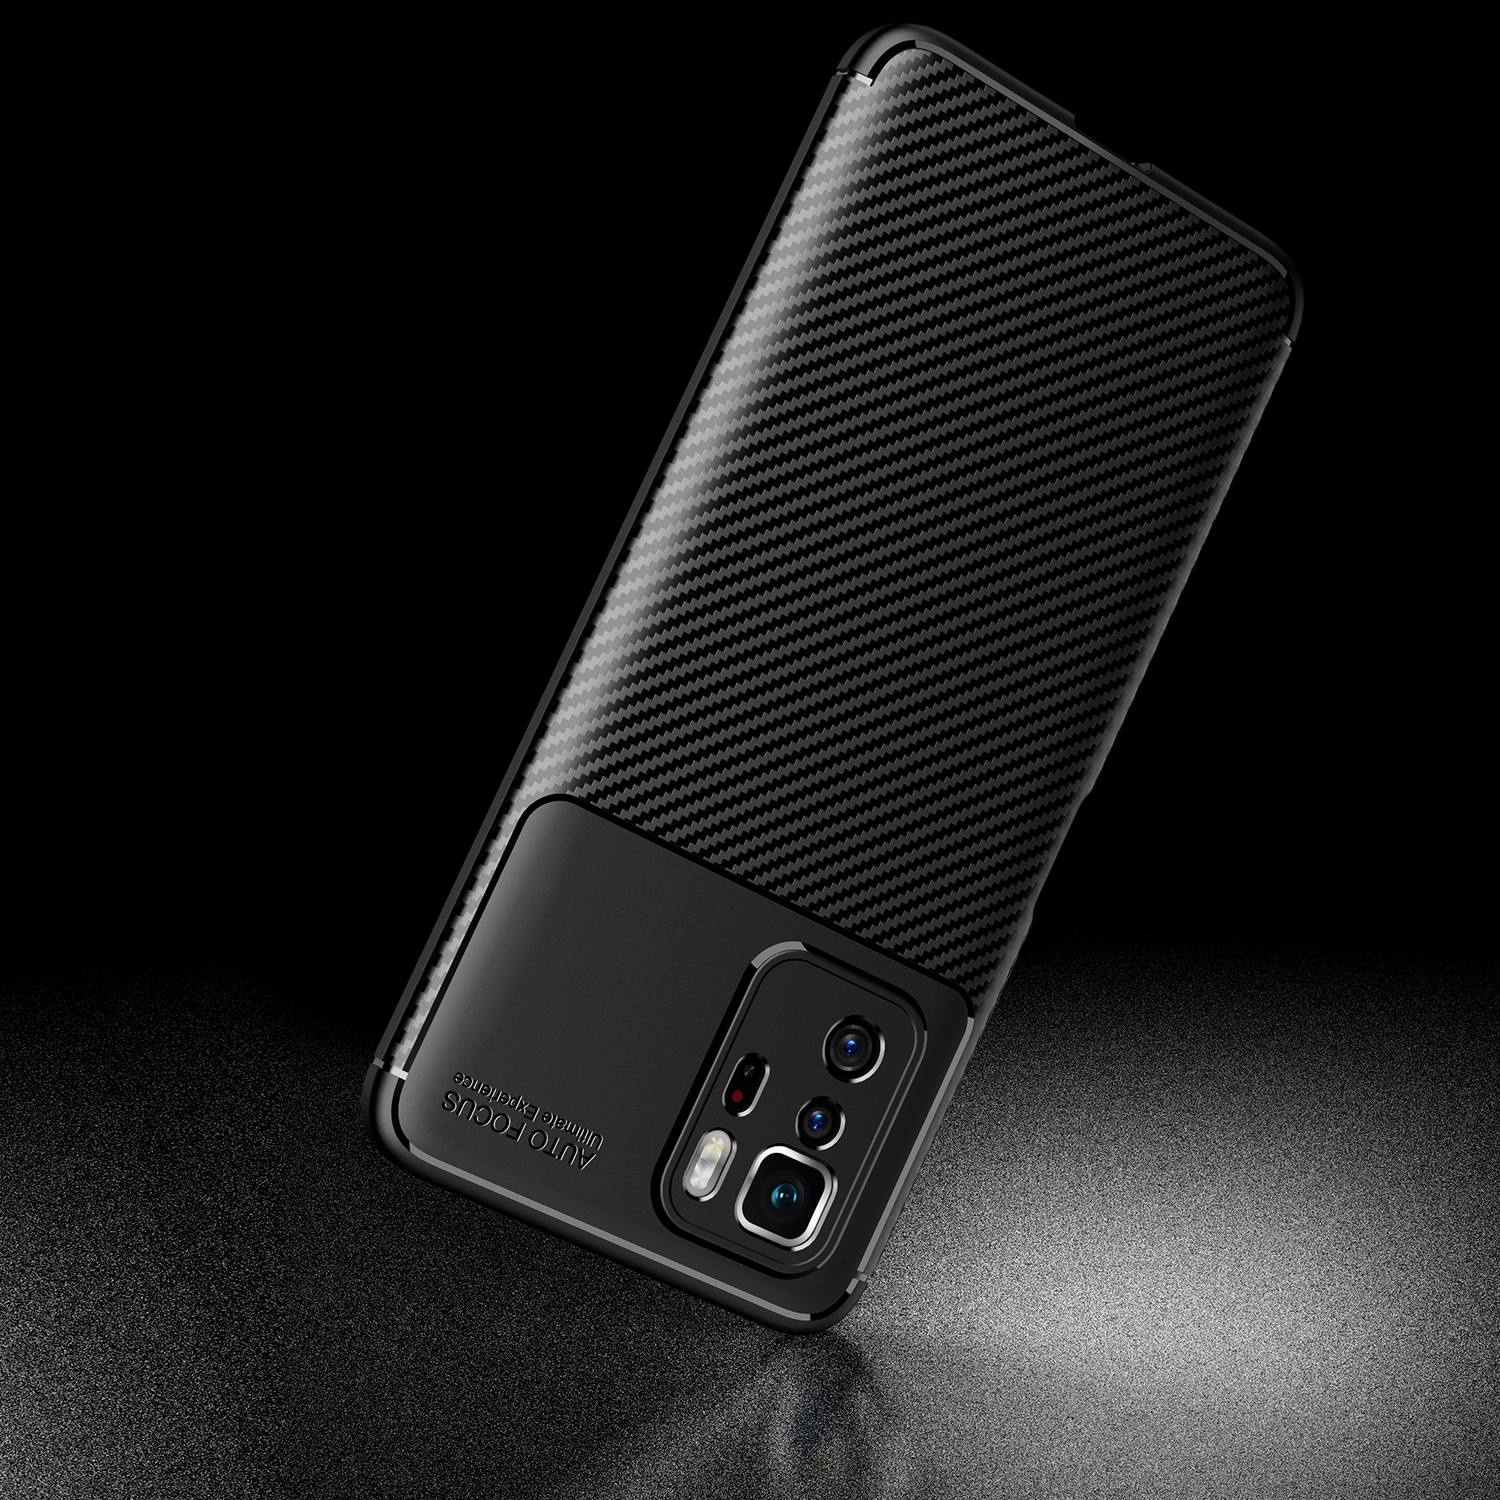 Bakeey-for-Xiaomi-Redmi-Note-10-Pro-5G-Case-Luxury-Carbon-Fiber-Pattern-Shockproof-Silicone-Protecti-1866174-3